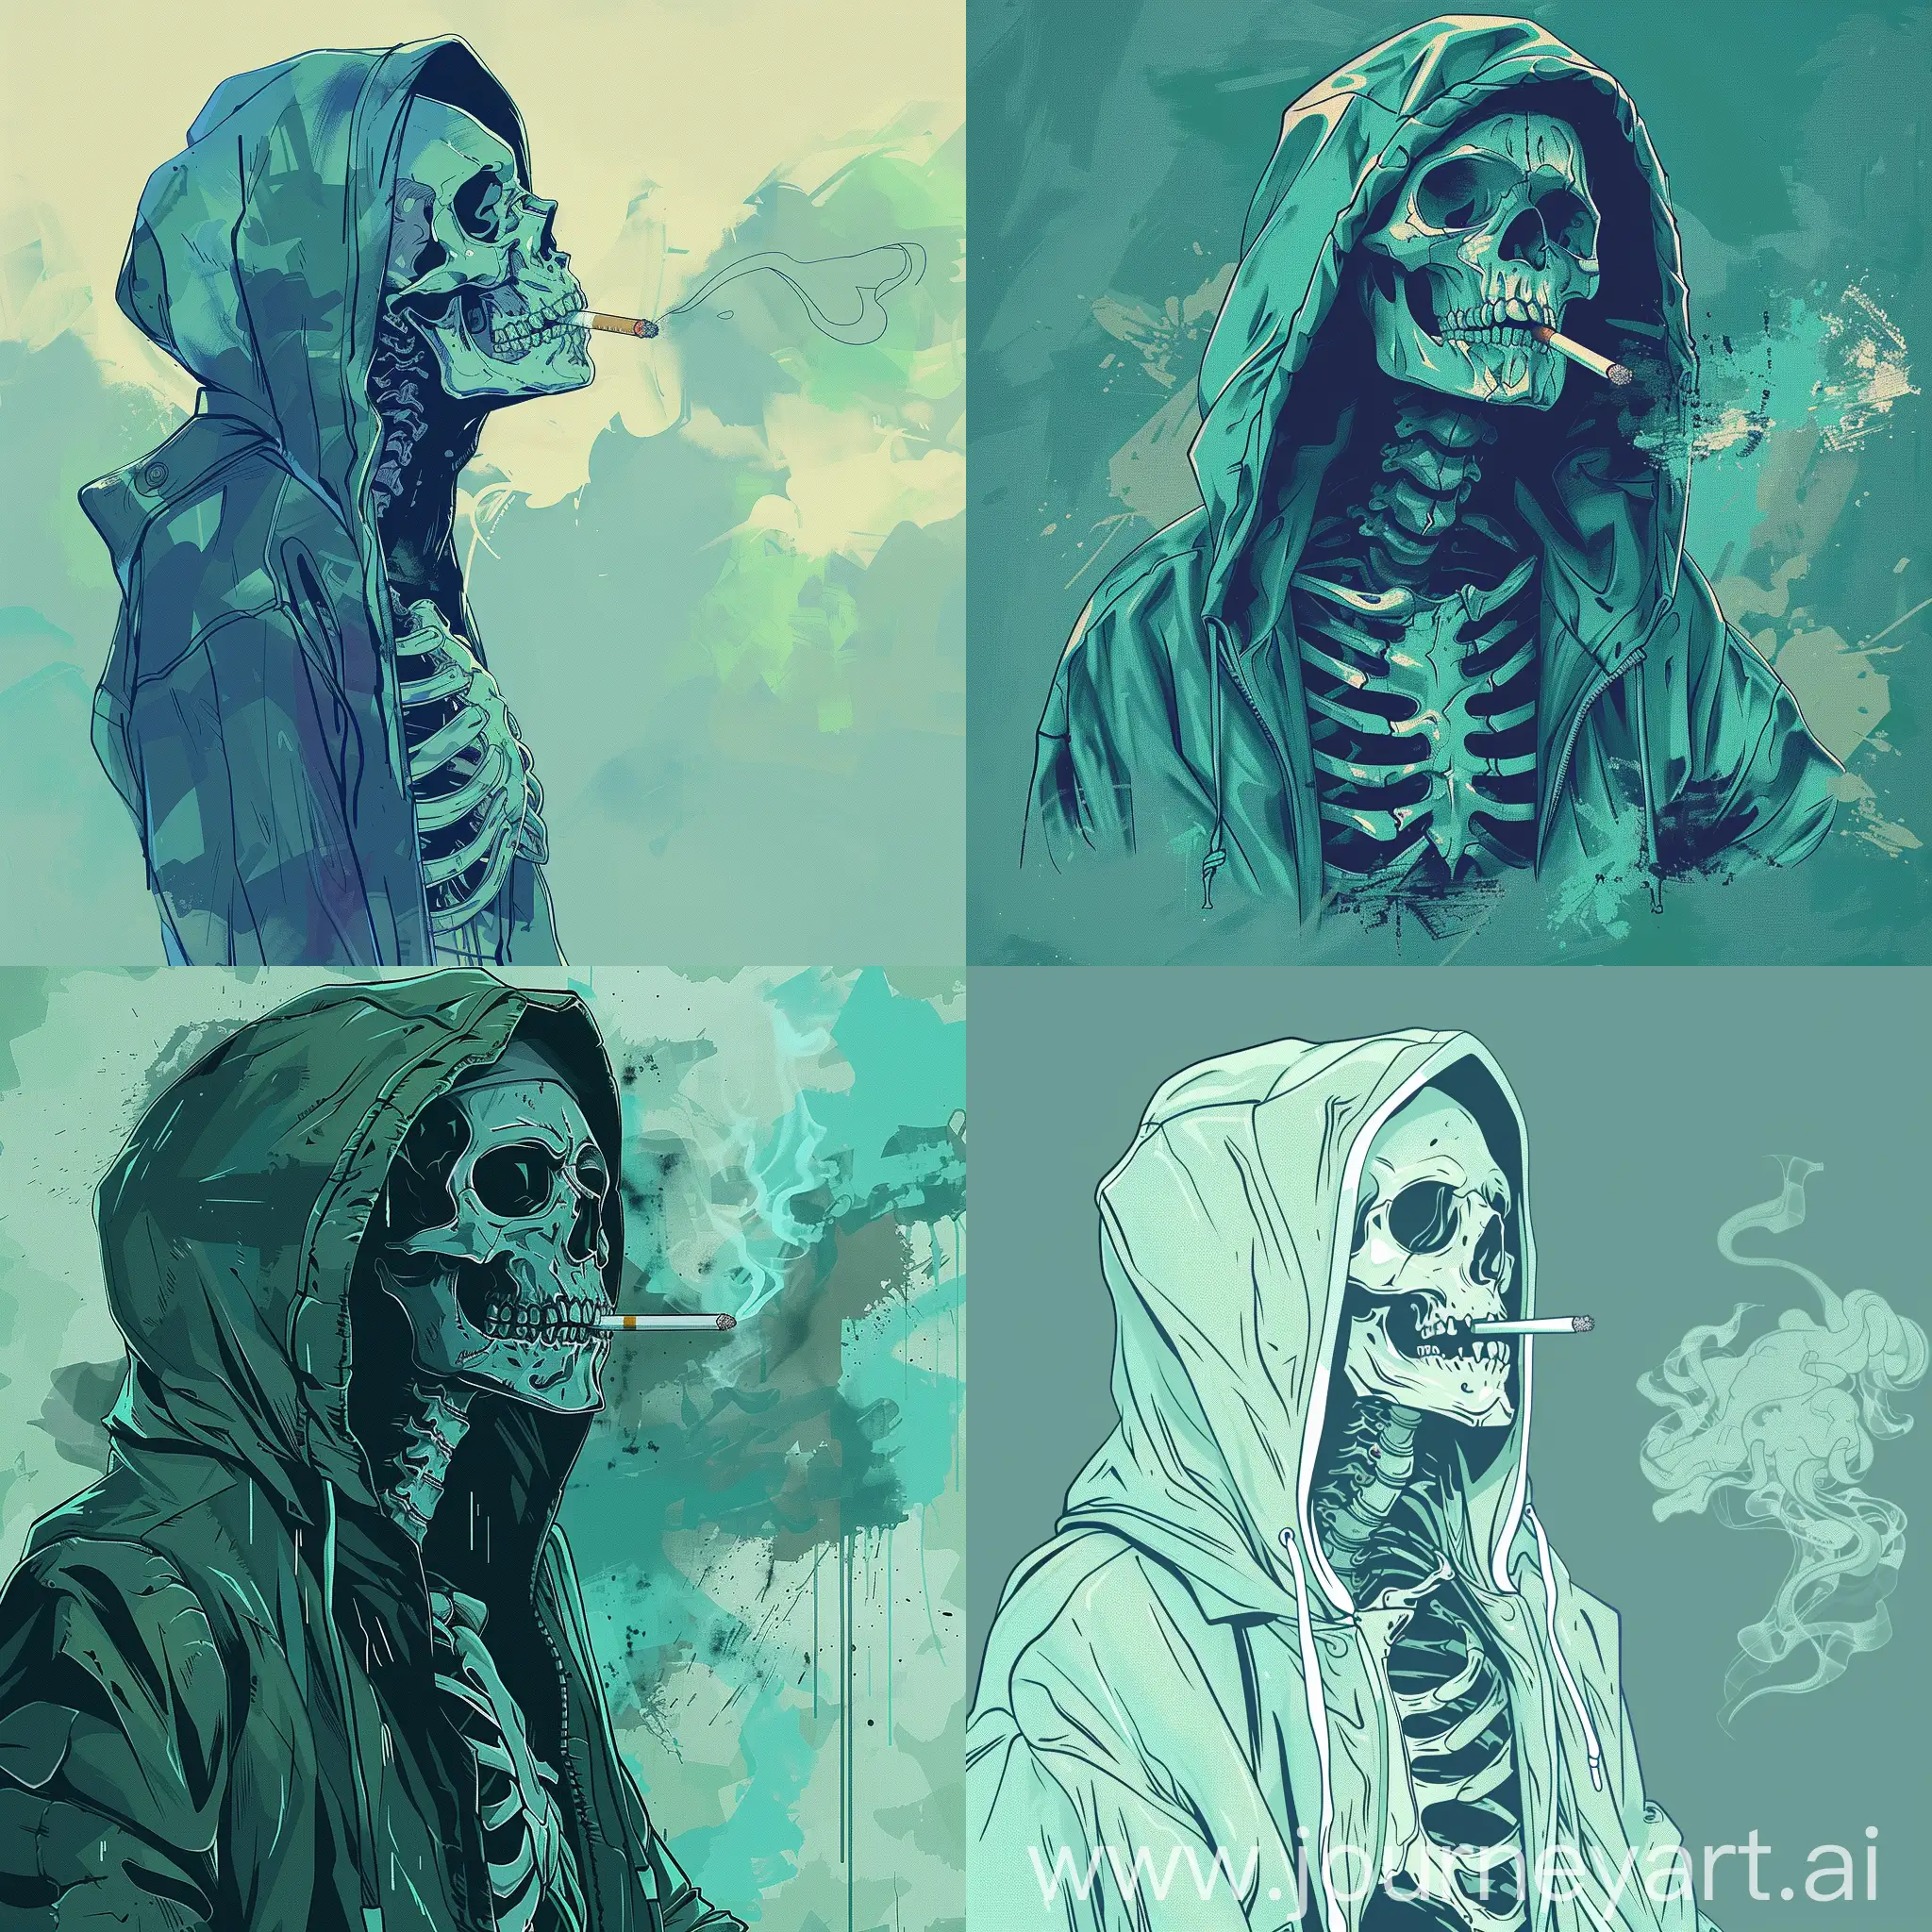 Anime-Skeleton-with-Hood-Jacket-and-Cigarette-in-GreenBlue-Tones